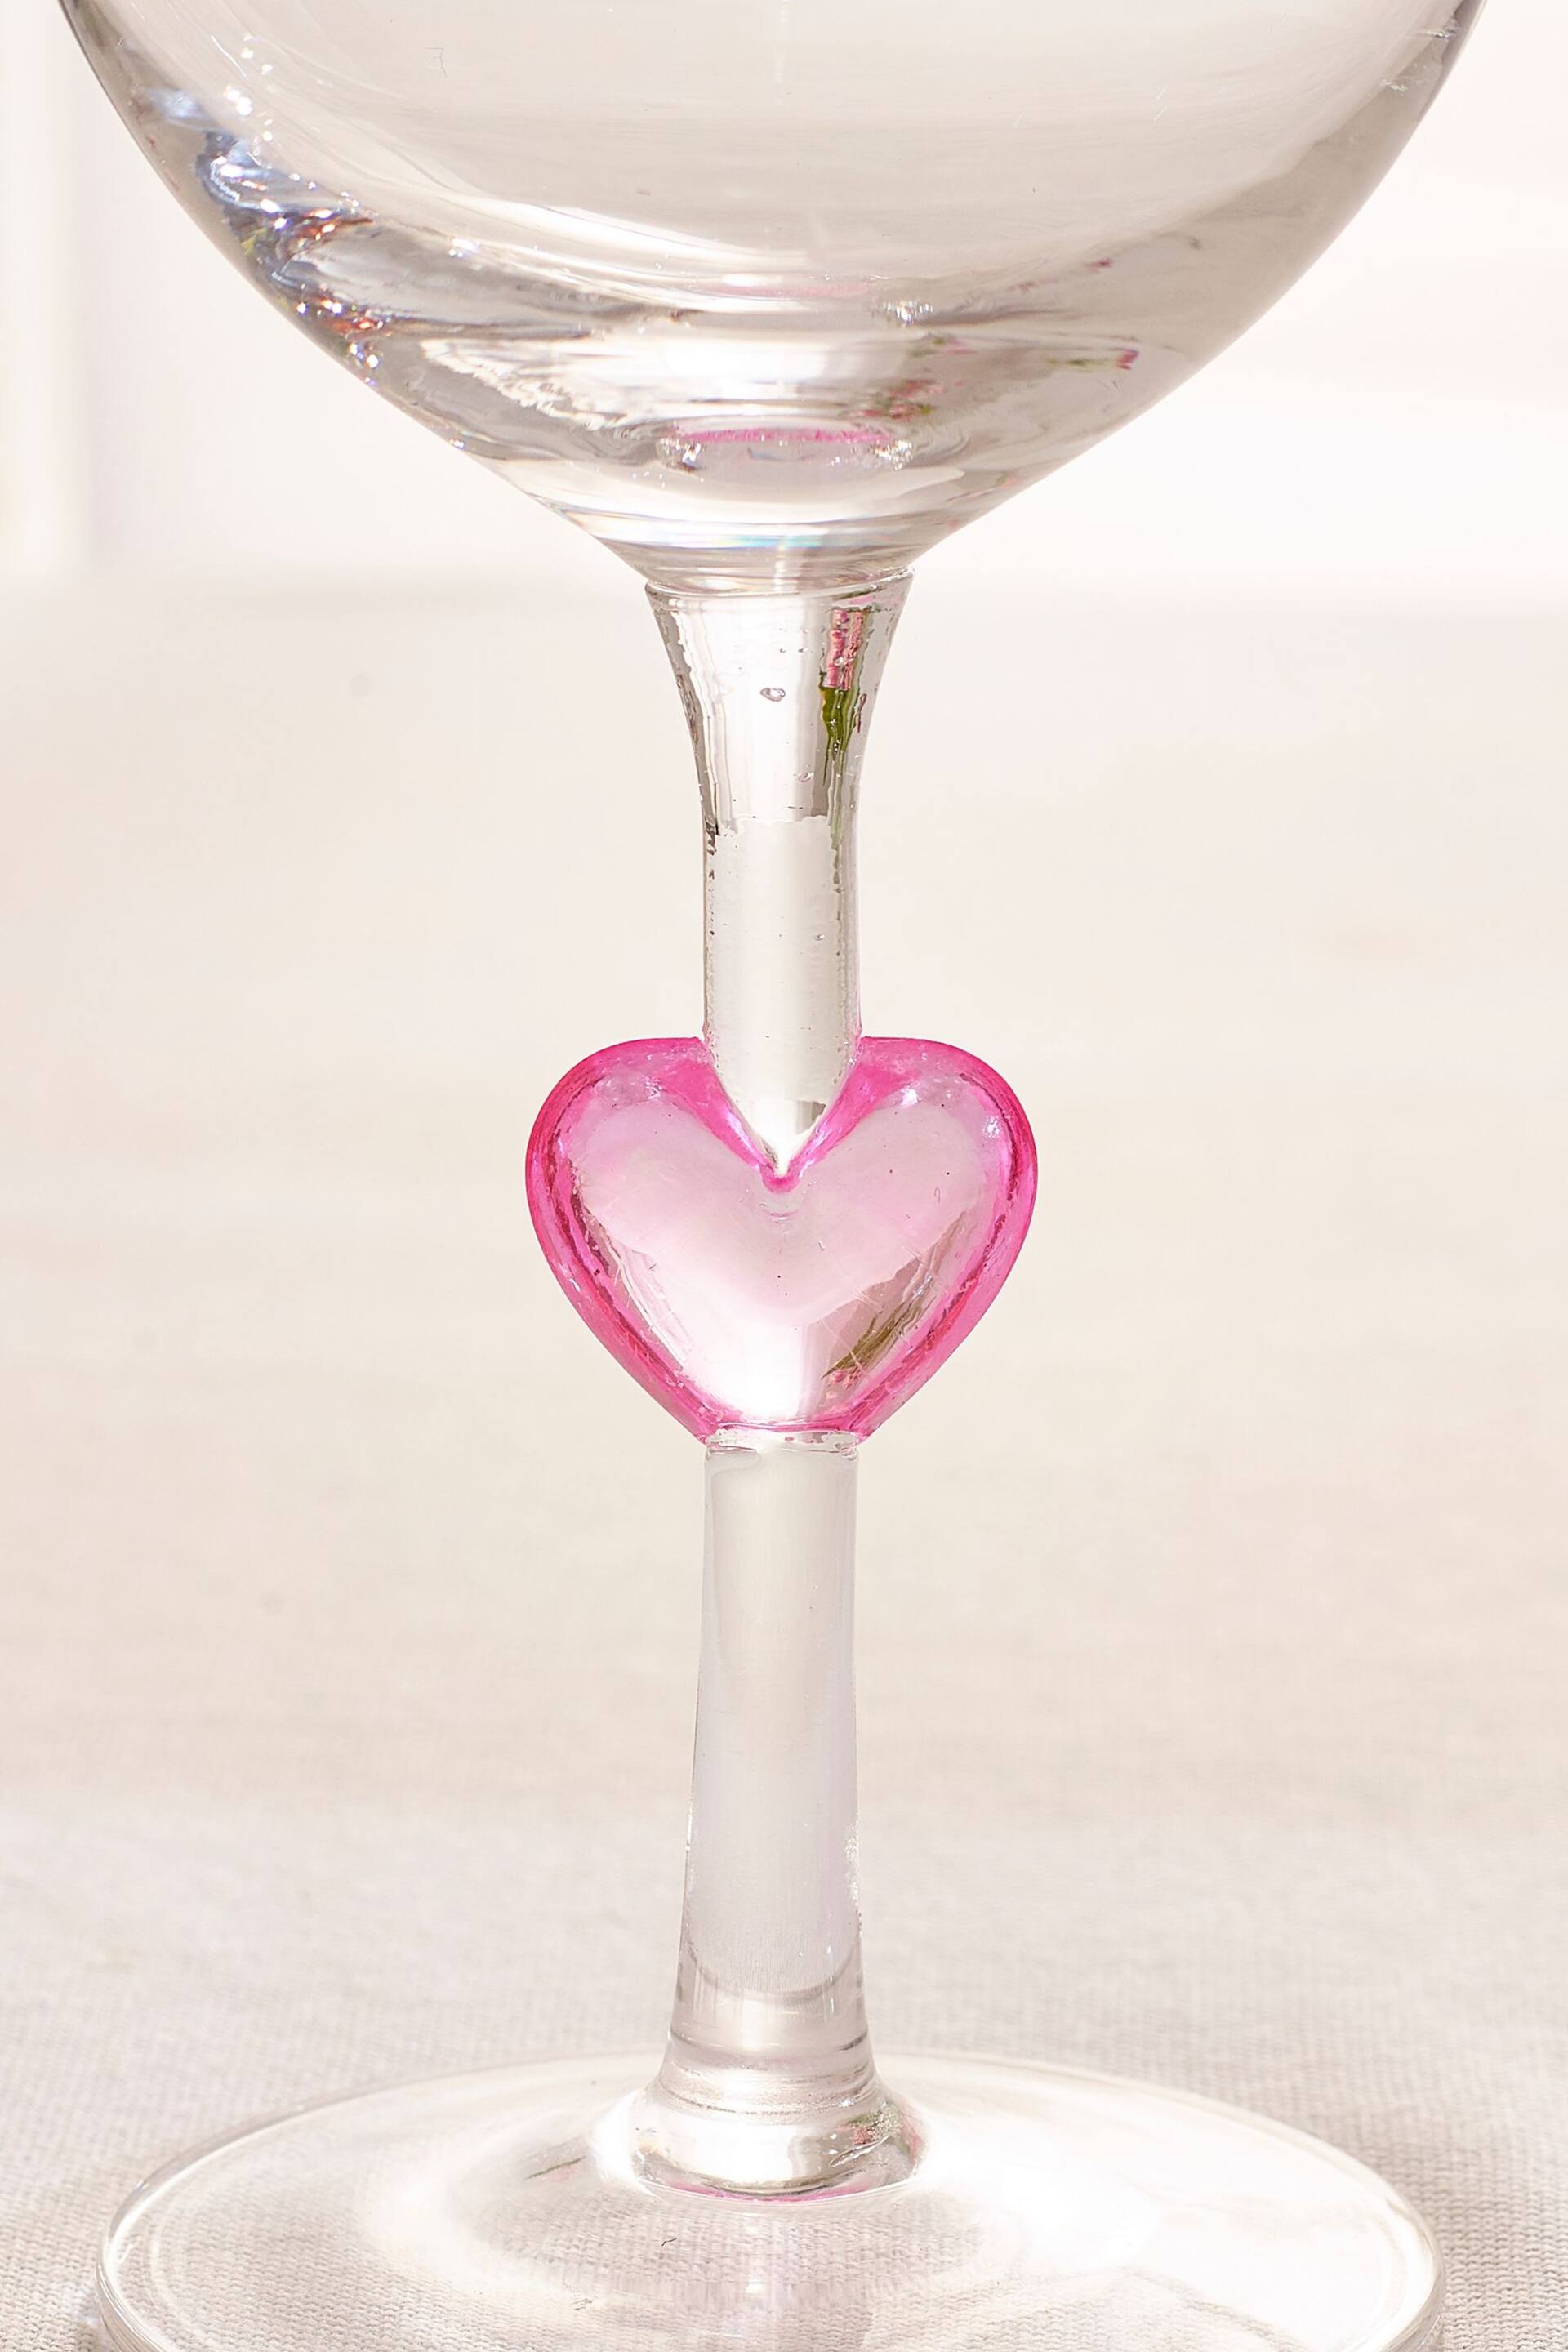 Set of 2 Clear Heart Stem Wine Glasses - Image 3 of 4